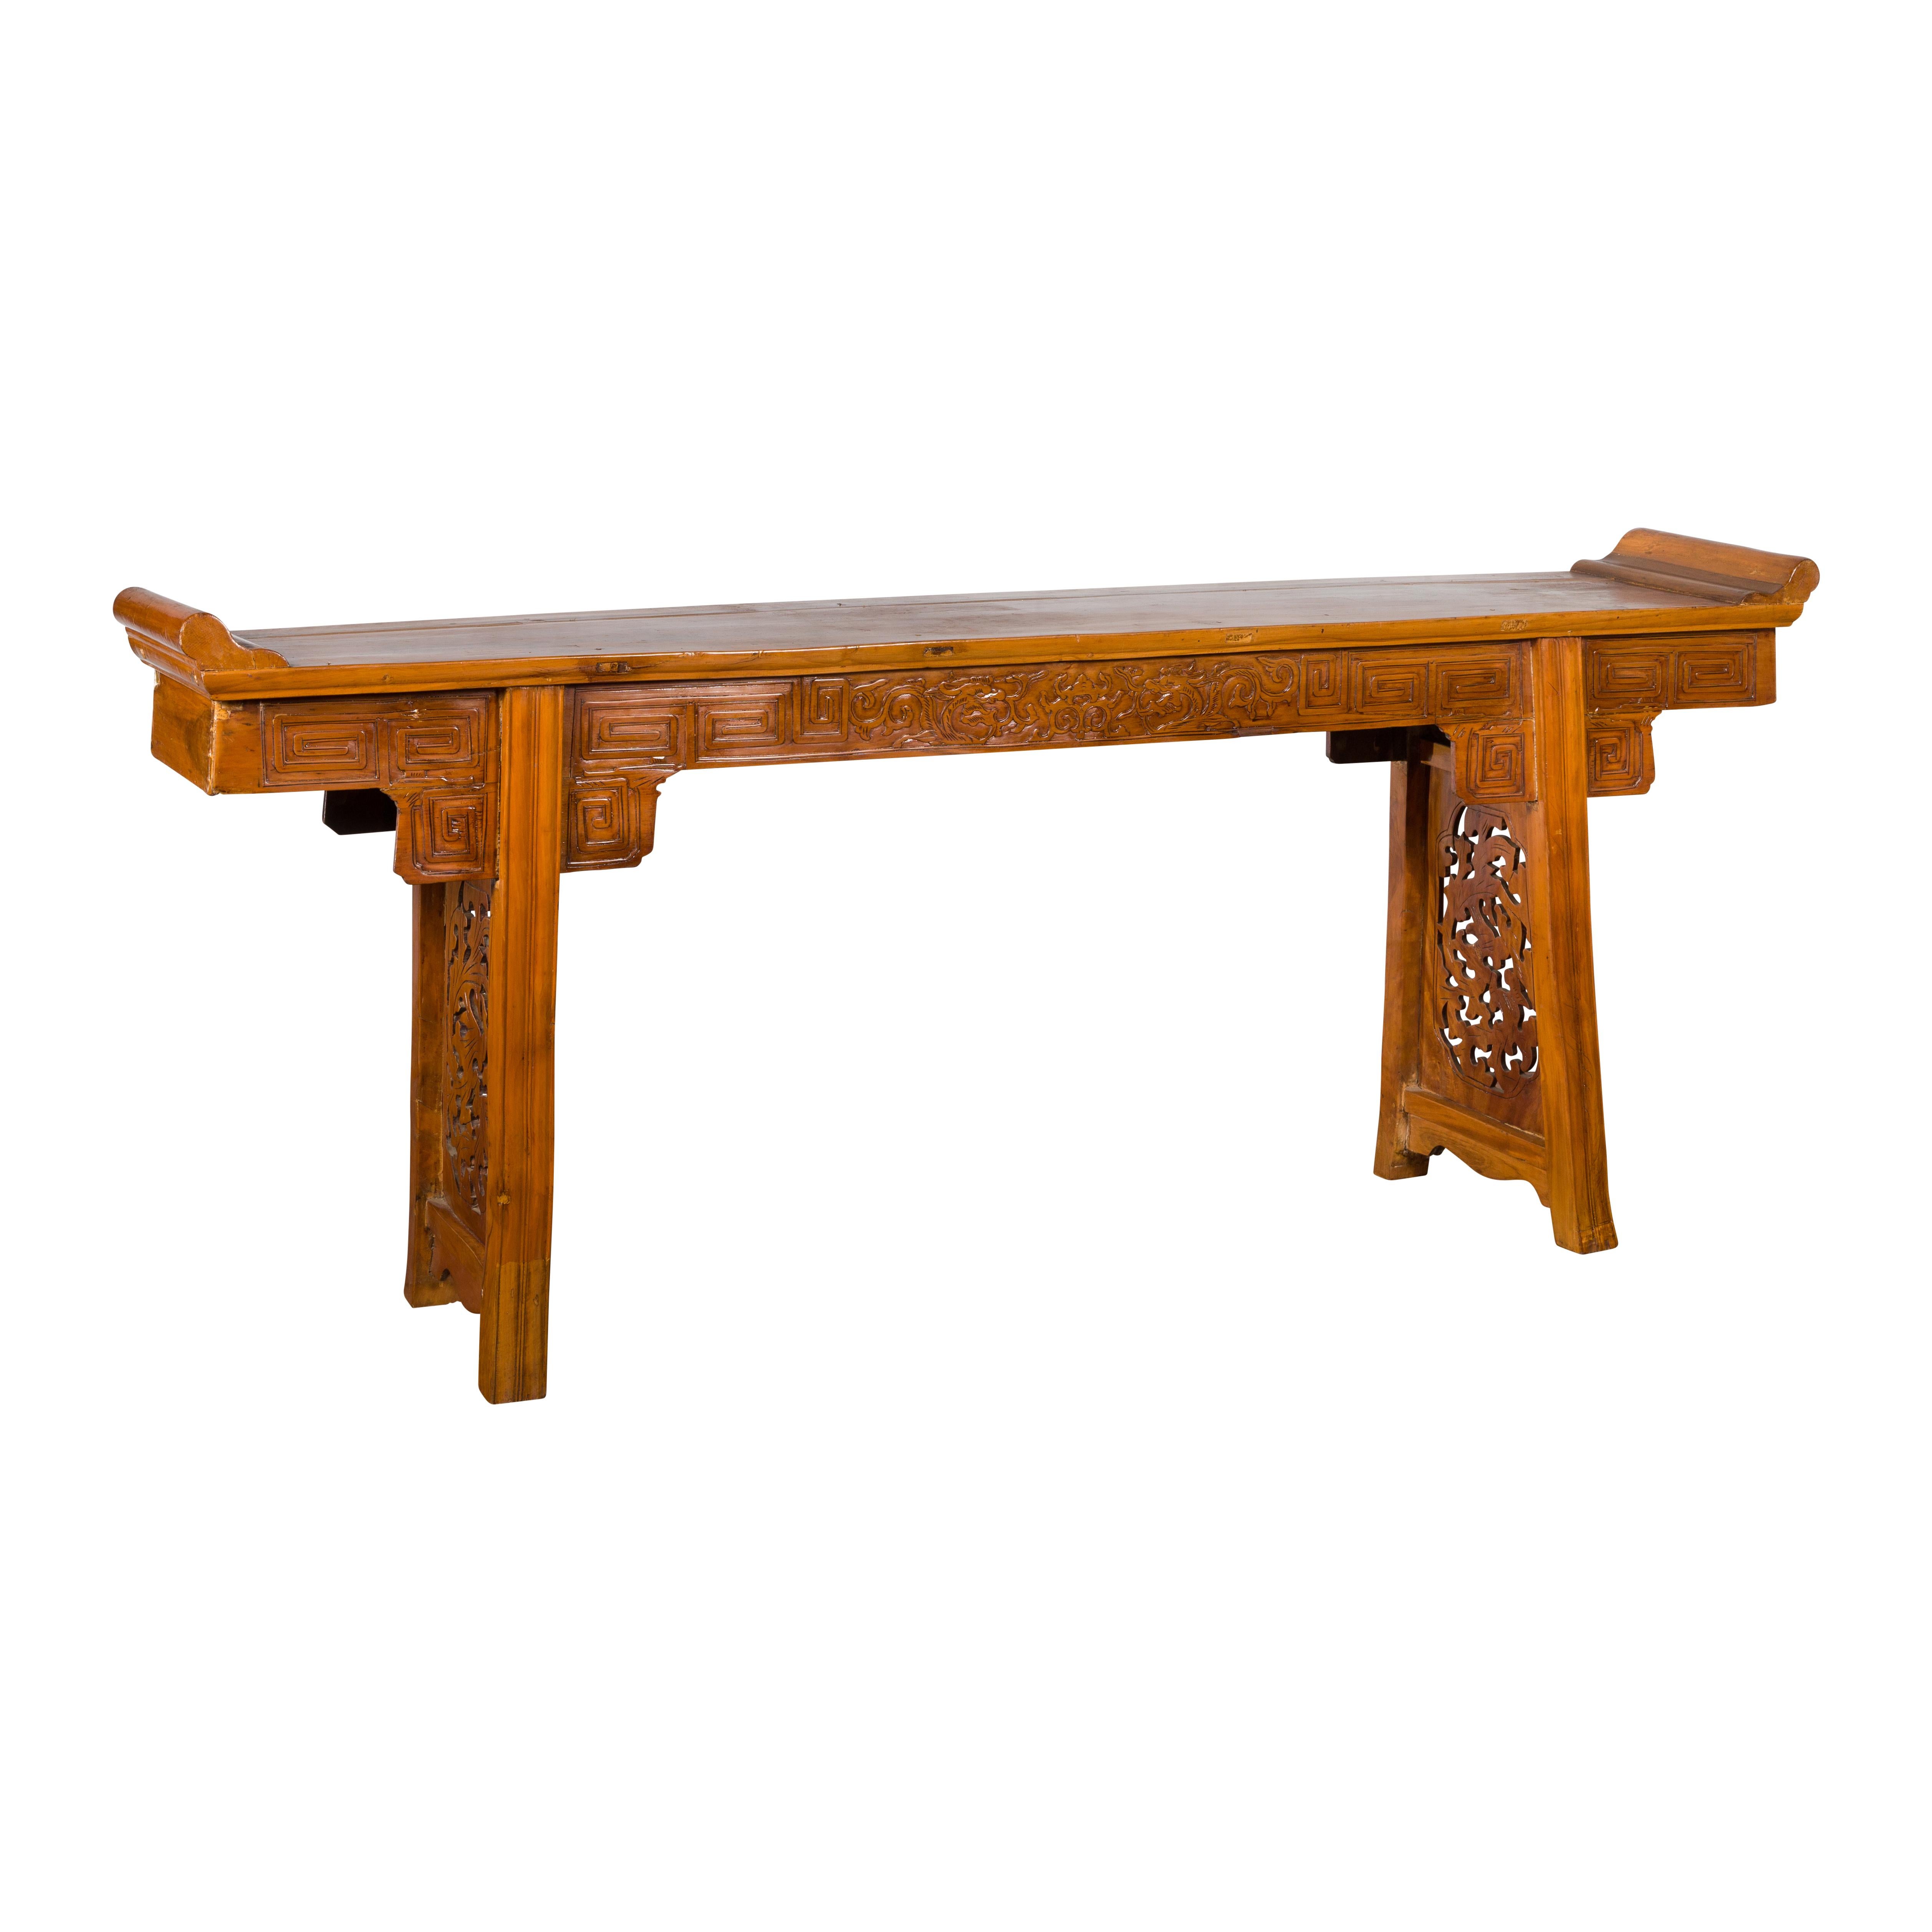 A Chinese Ming Dynasty style altar console table from the early 20th century, with meander-carved apron, everted flanges and dragon motifs. Created in China during the second quarter of the 20th century this Ming style console altar table features a